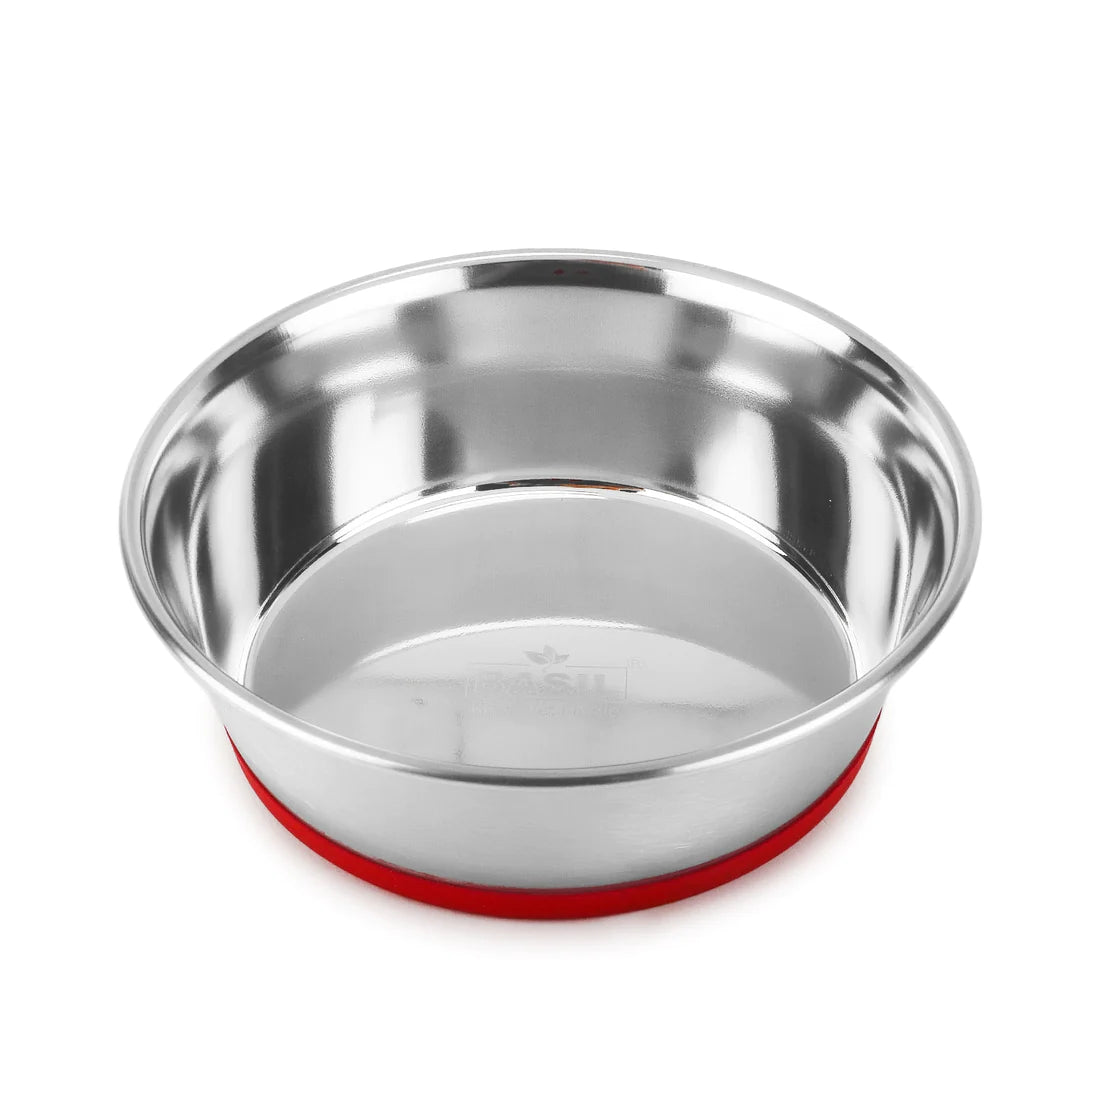 Basil Heavy Dish Bowls with Silicon Bottom For Pet